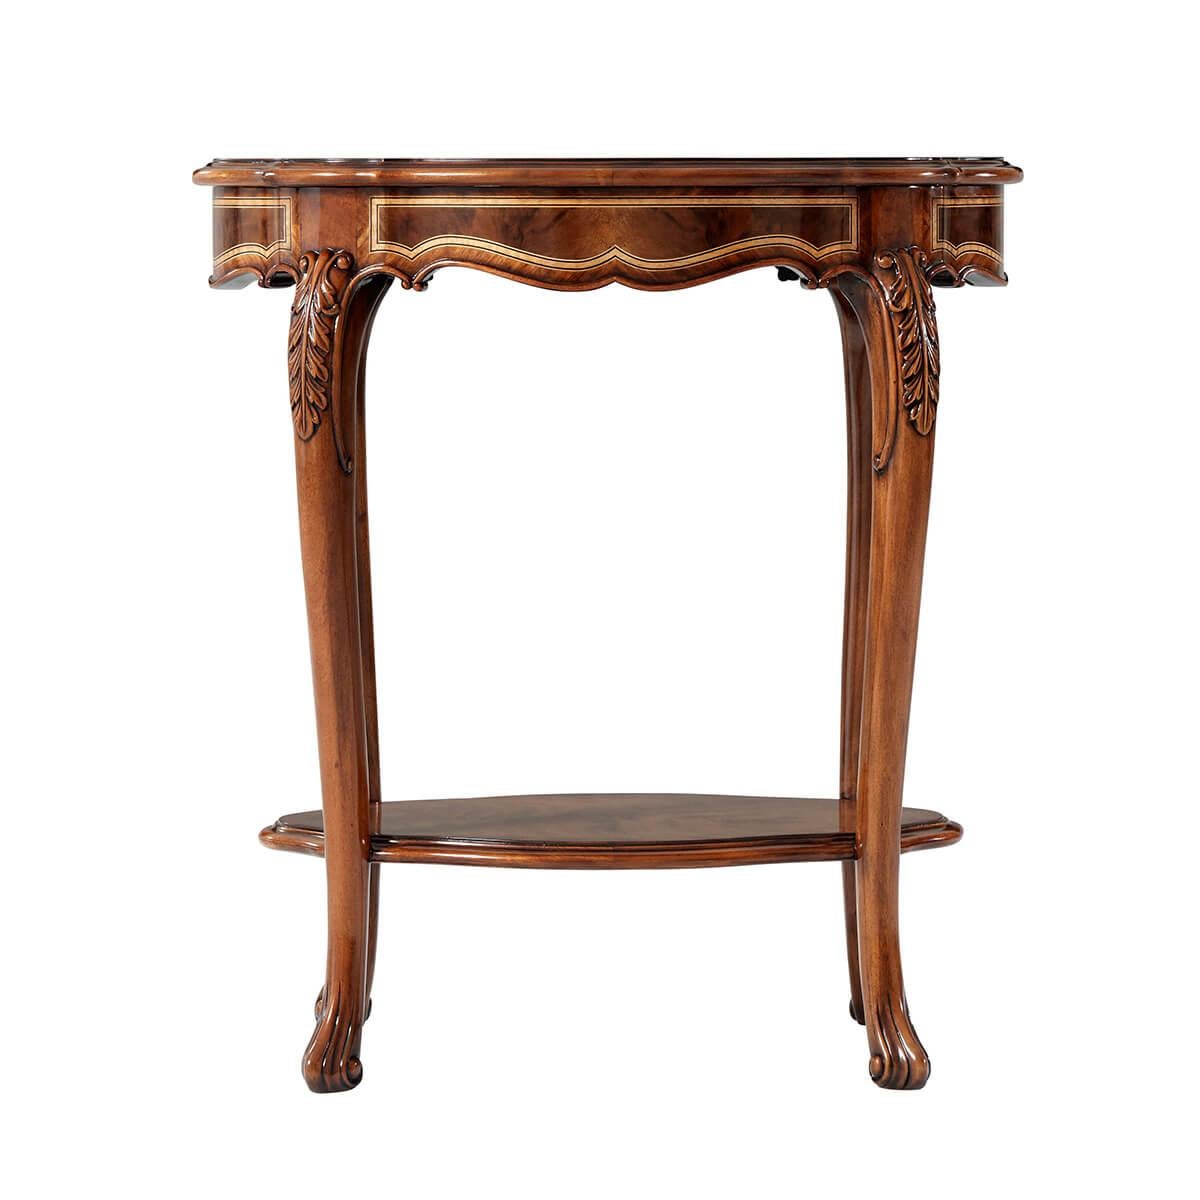 A figured walnut and mahogany banded accent table with inlaid and crossbanded details, the serpentine molded edge oval top above a shaped frieze on finely acanthus carved cabriole legs joined by a serpentine oval shelf stretcher.

Dimensions: 24